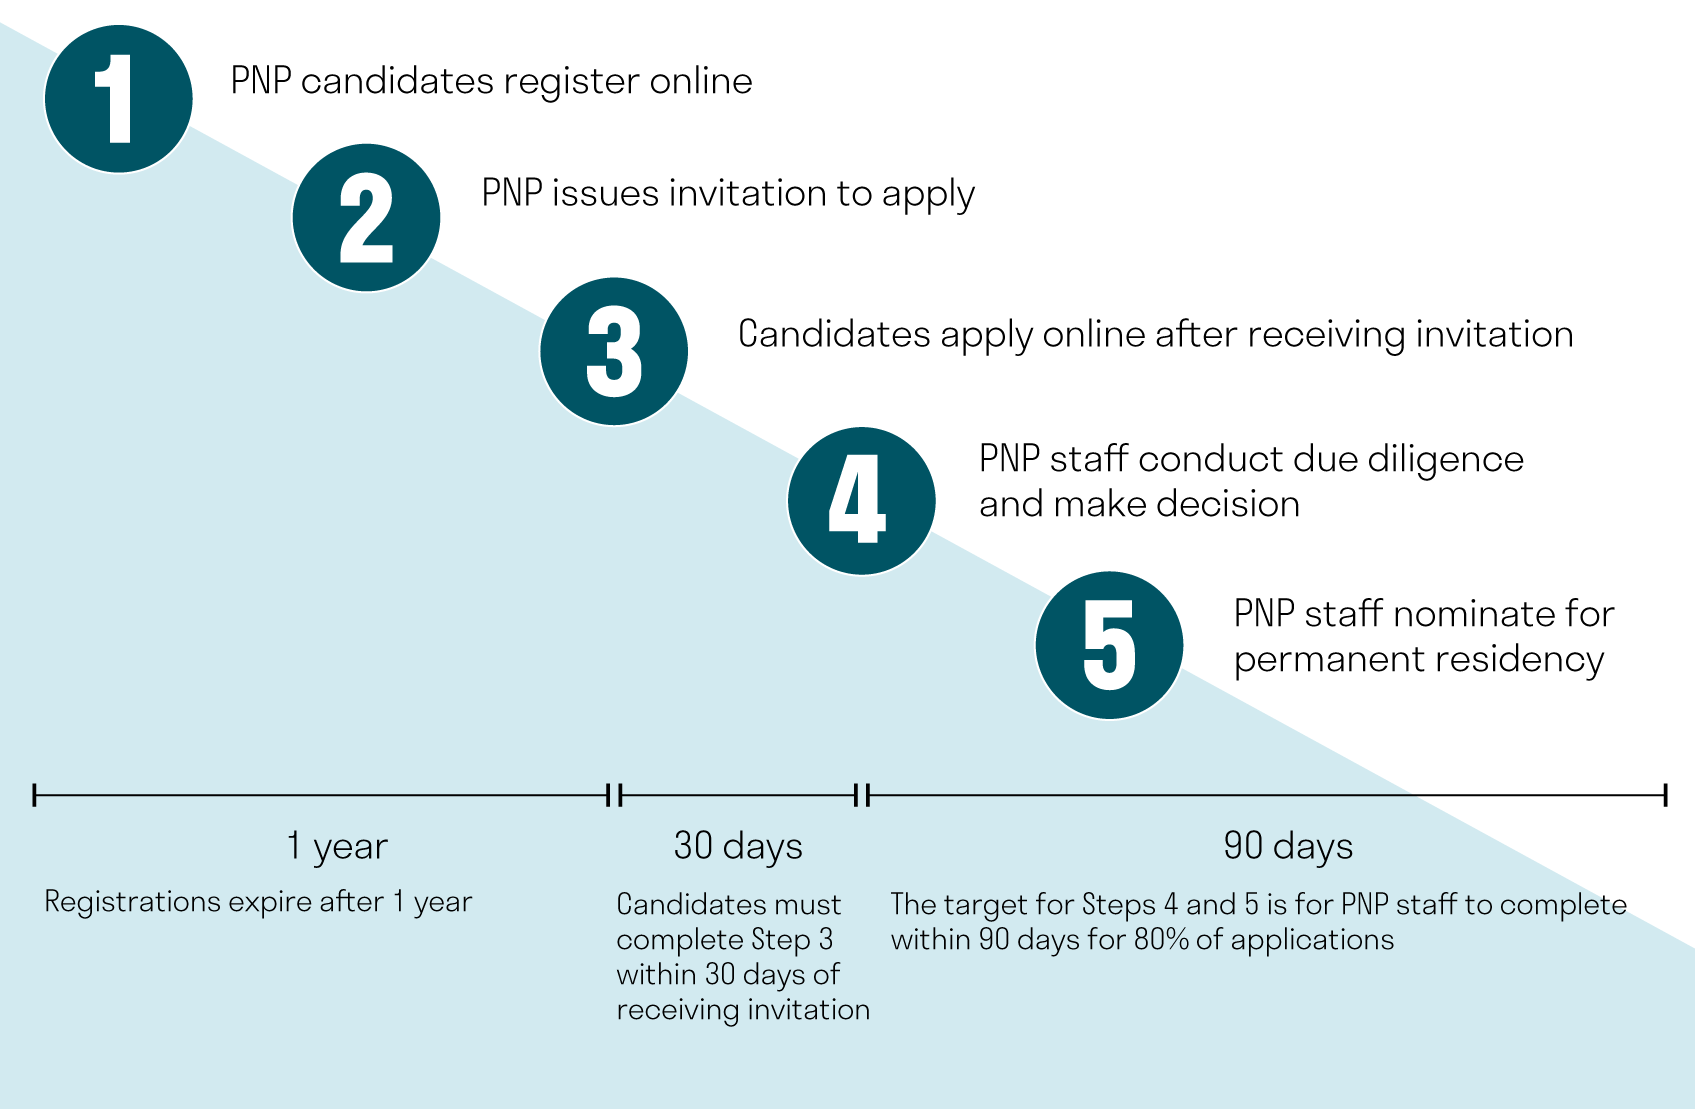 BC PNP registration and application process: 1) PNP candidates register online 2) PNP issues invitation to apply 3) Candidates apply online after receiving invitation 4) PNP staff conduct due diligence and make decision 5) PNP staff nominate for permanent residency